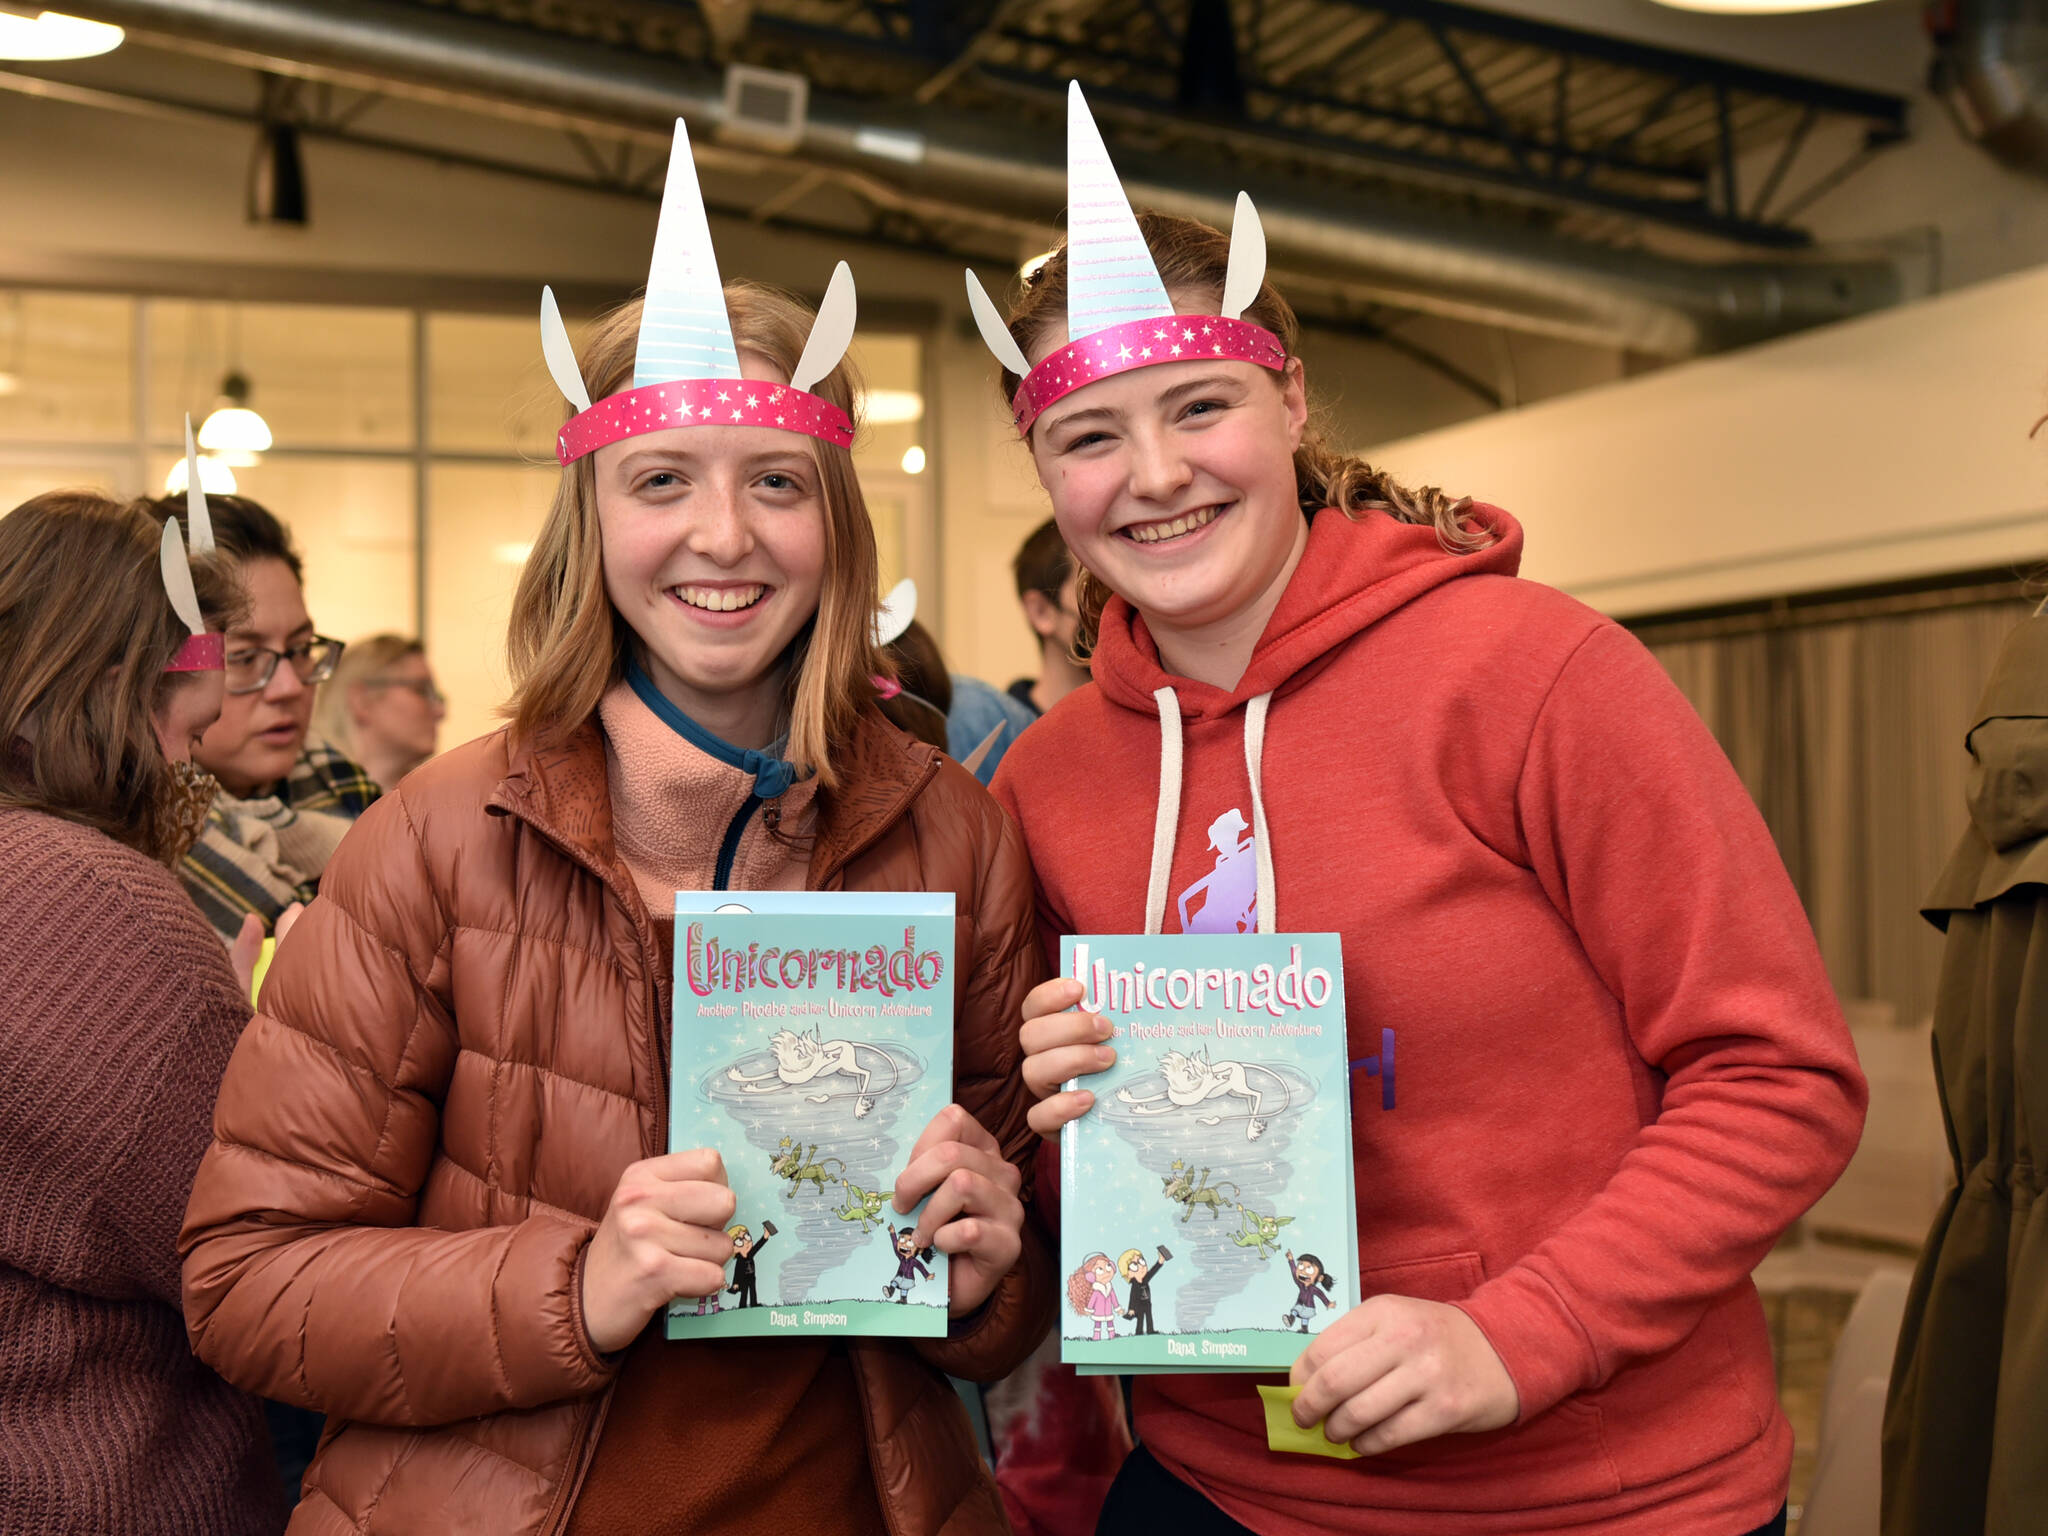 Bea Skipton and Allie Poulson-Houser pose with their Phoebe and her Unicorn books during a book signing event with author Dana Simpson.